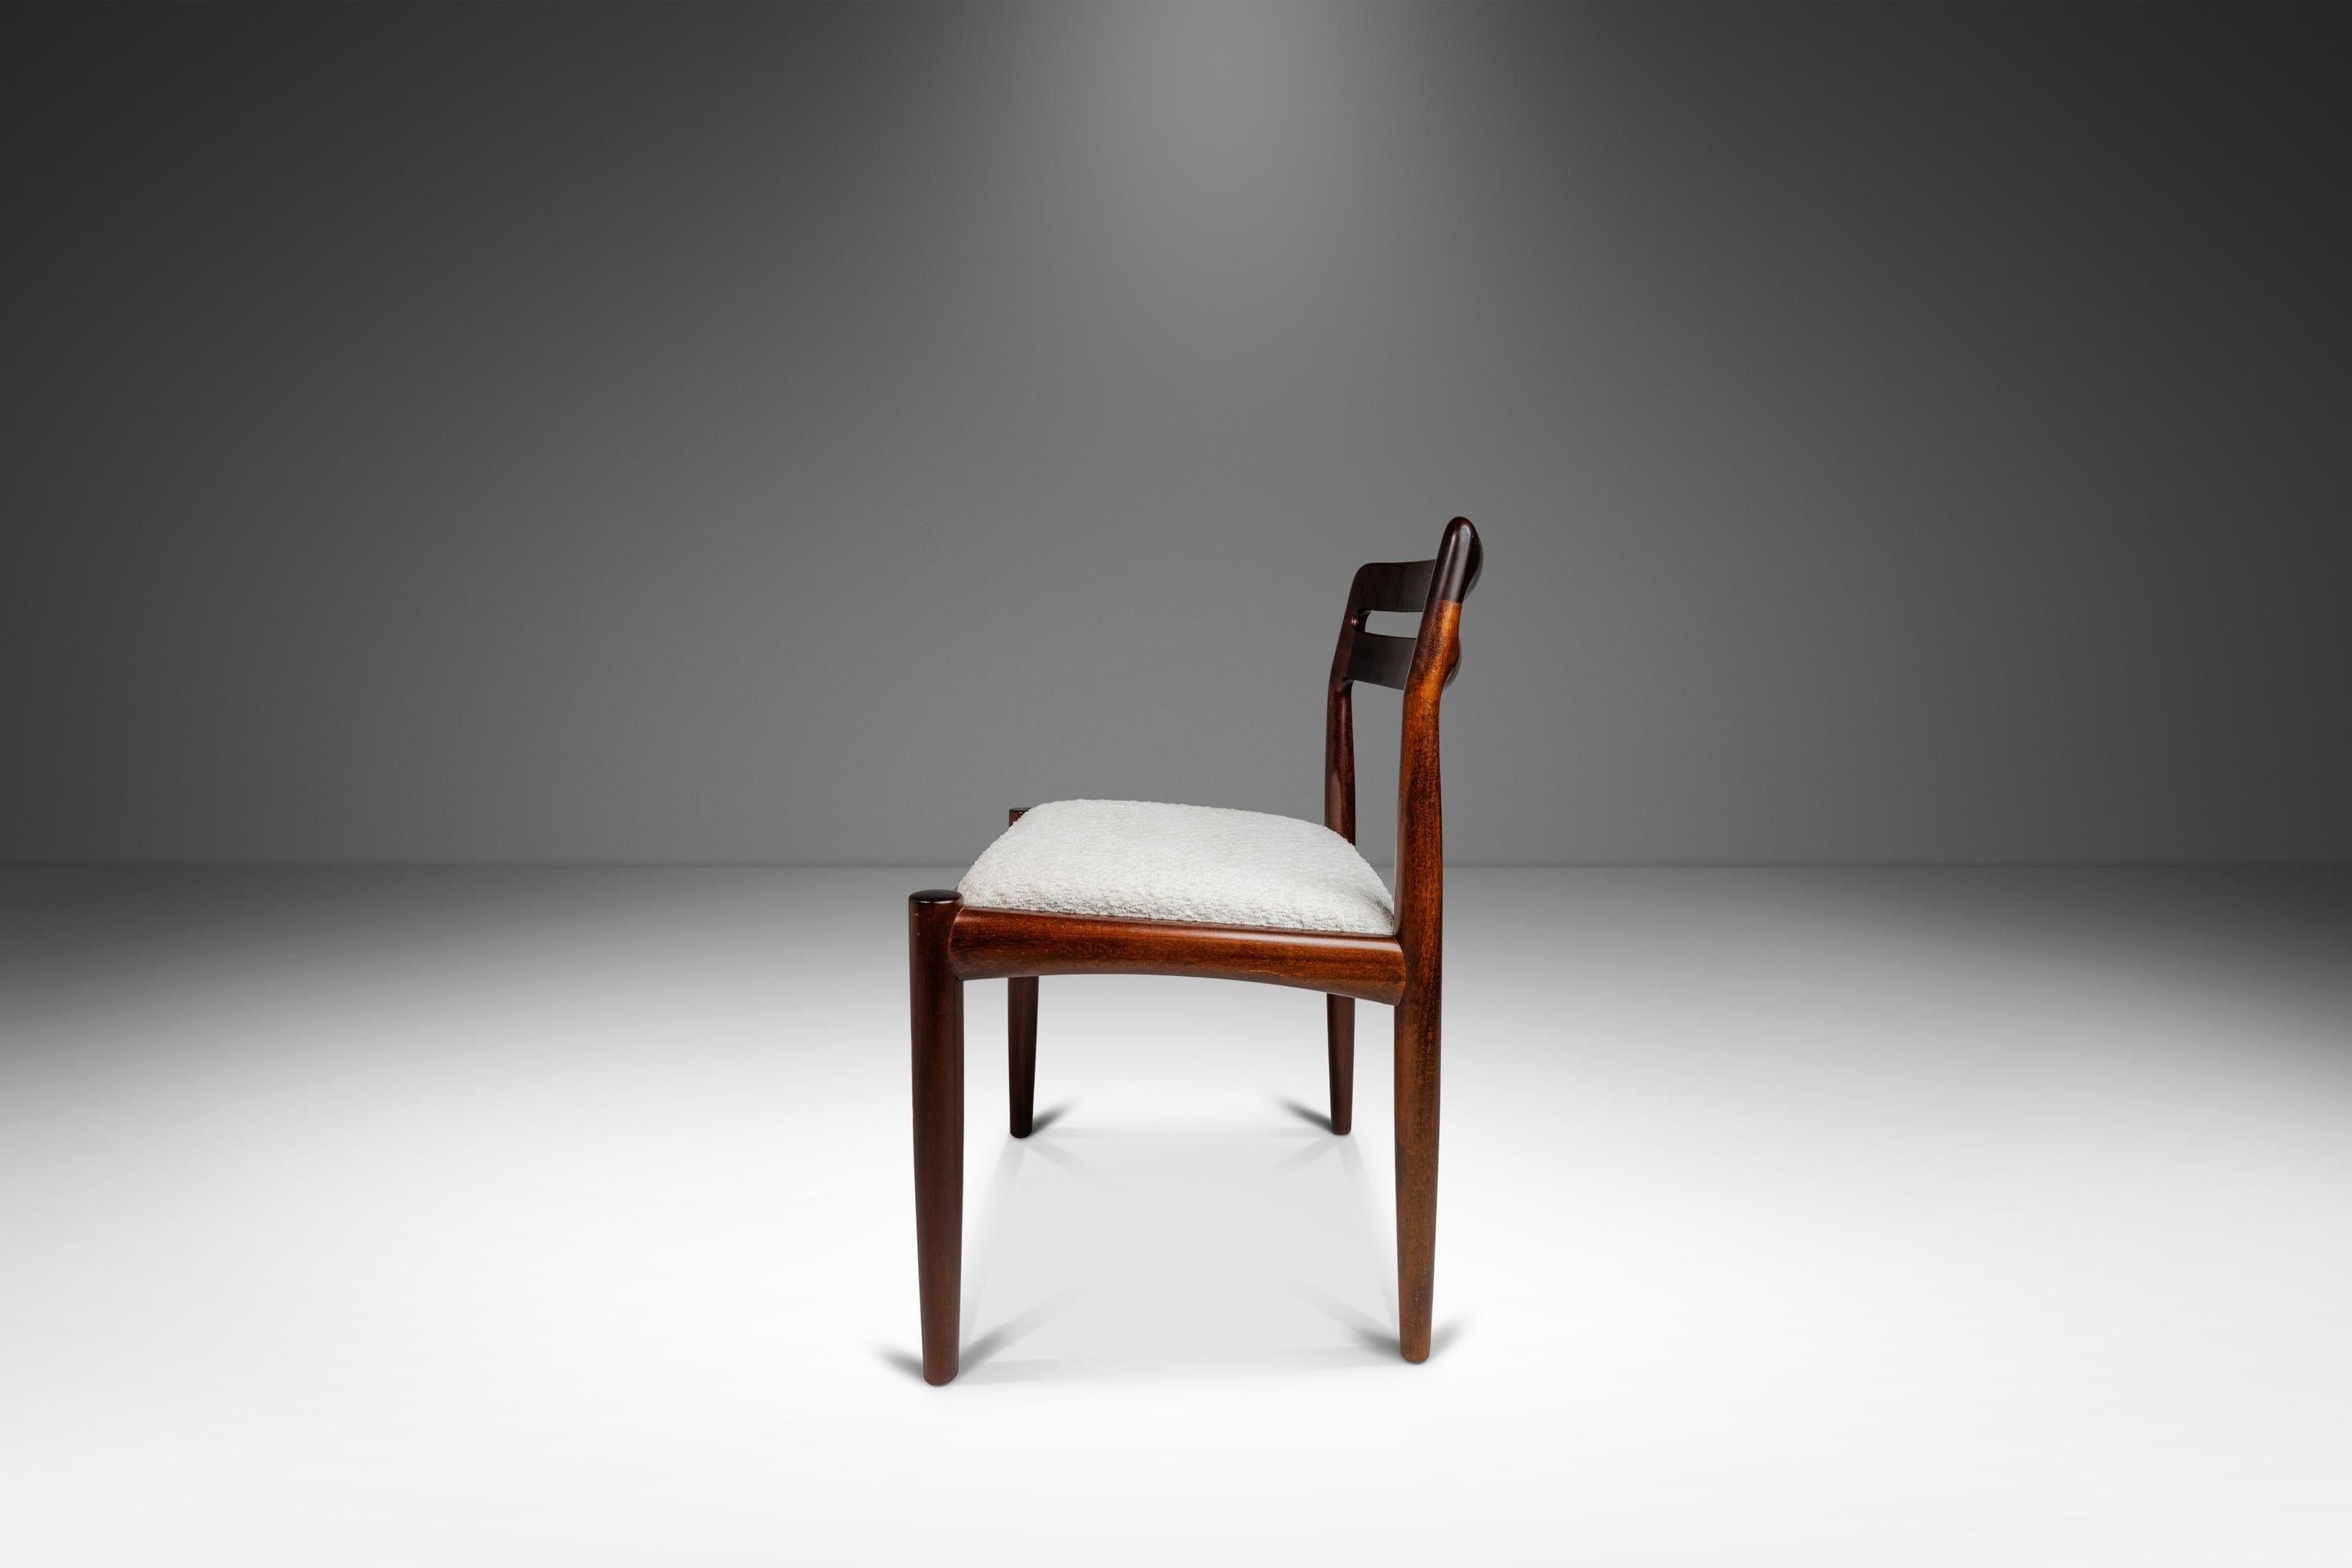 Danish Set of 4 Model 382 Dining Chairs in Mahogany by H.W. Klein, Denmark, c. 1960s For Sale